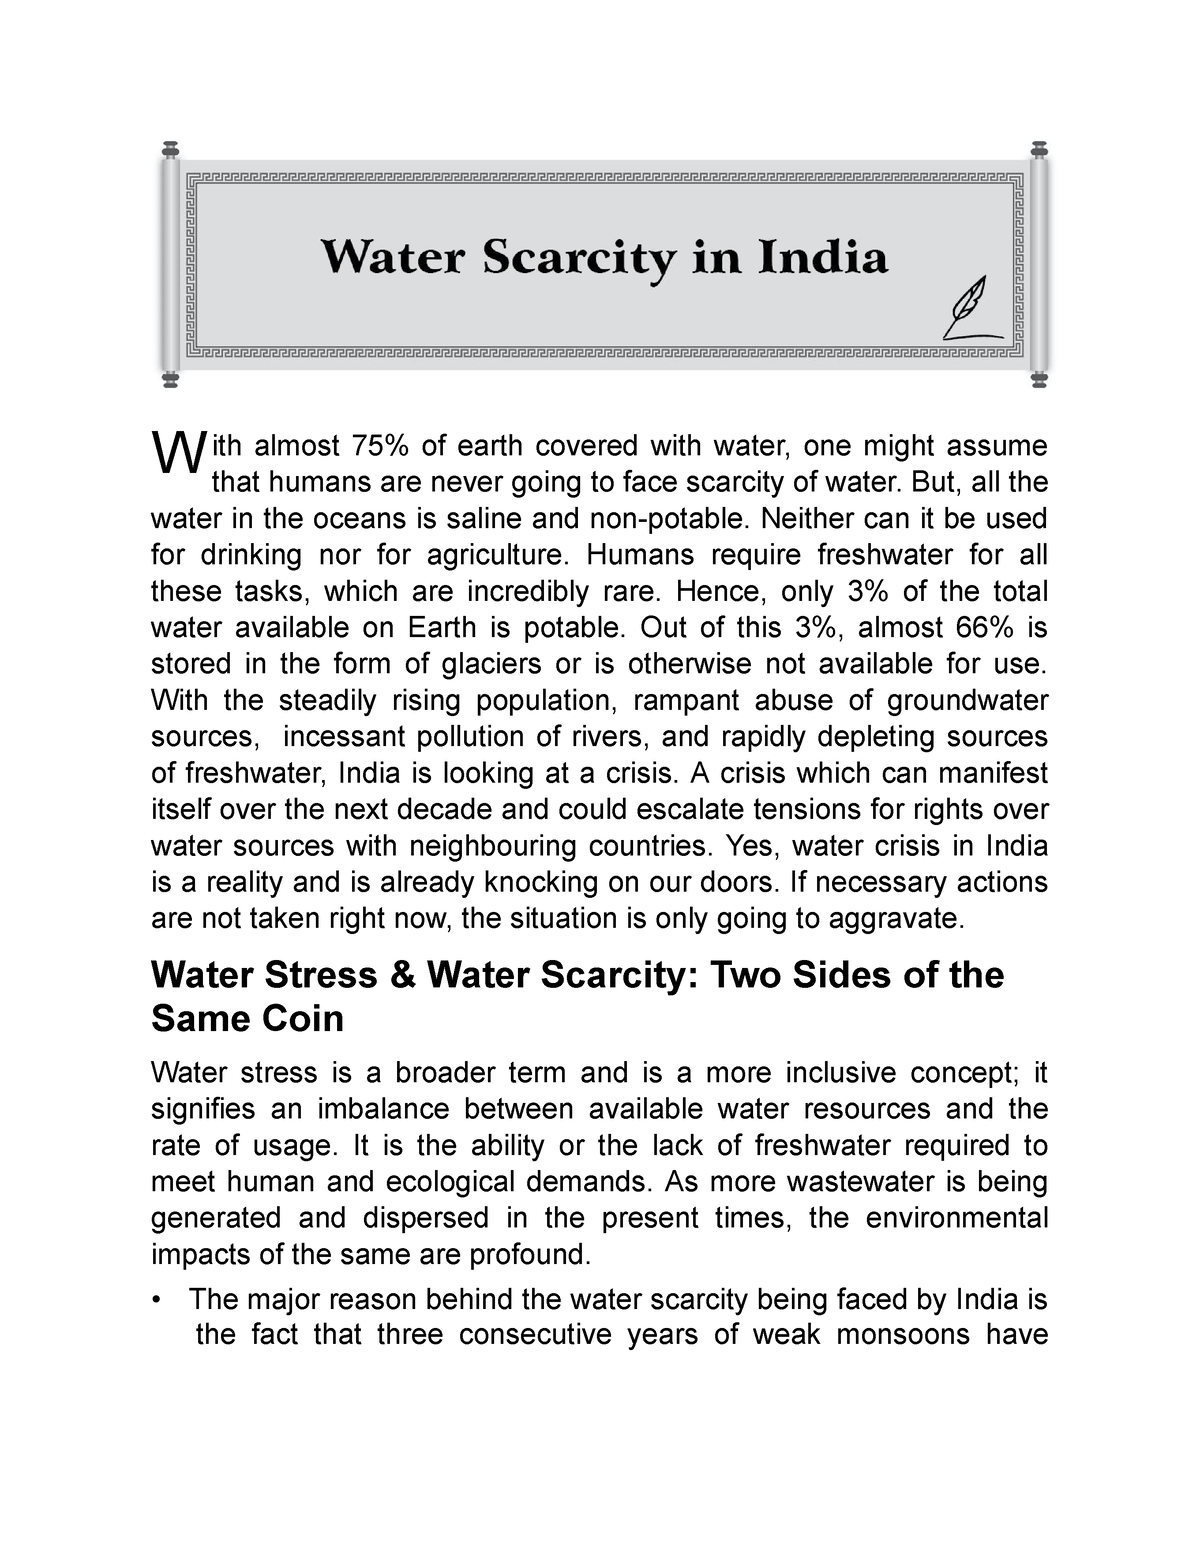 water scarcity essay in 200 words